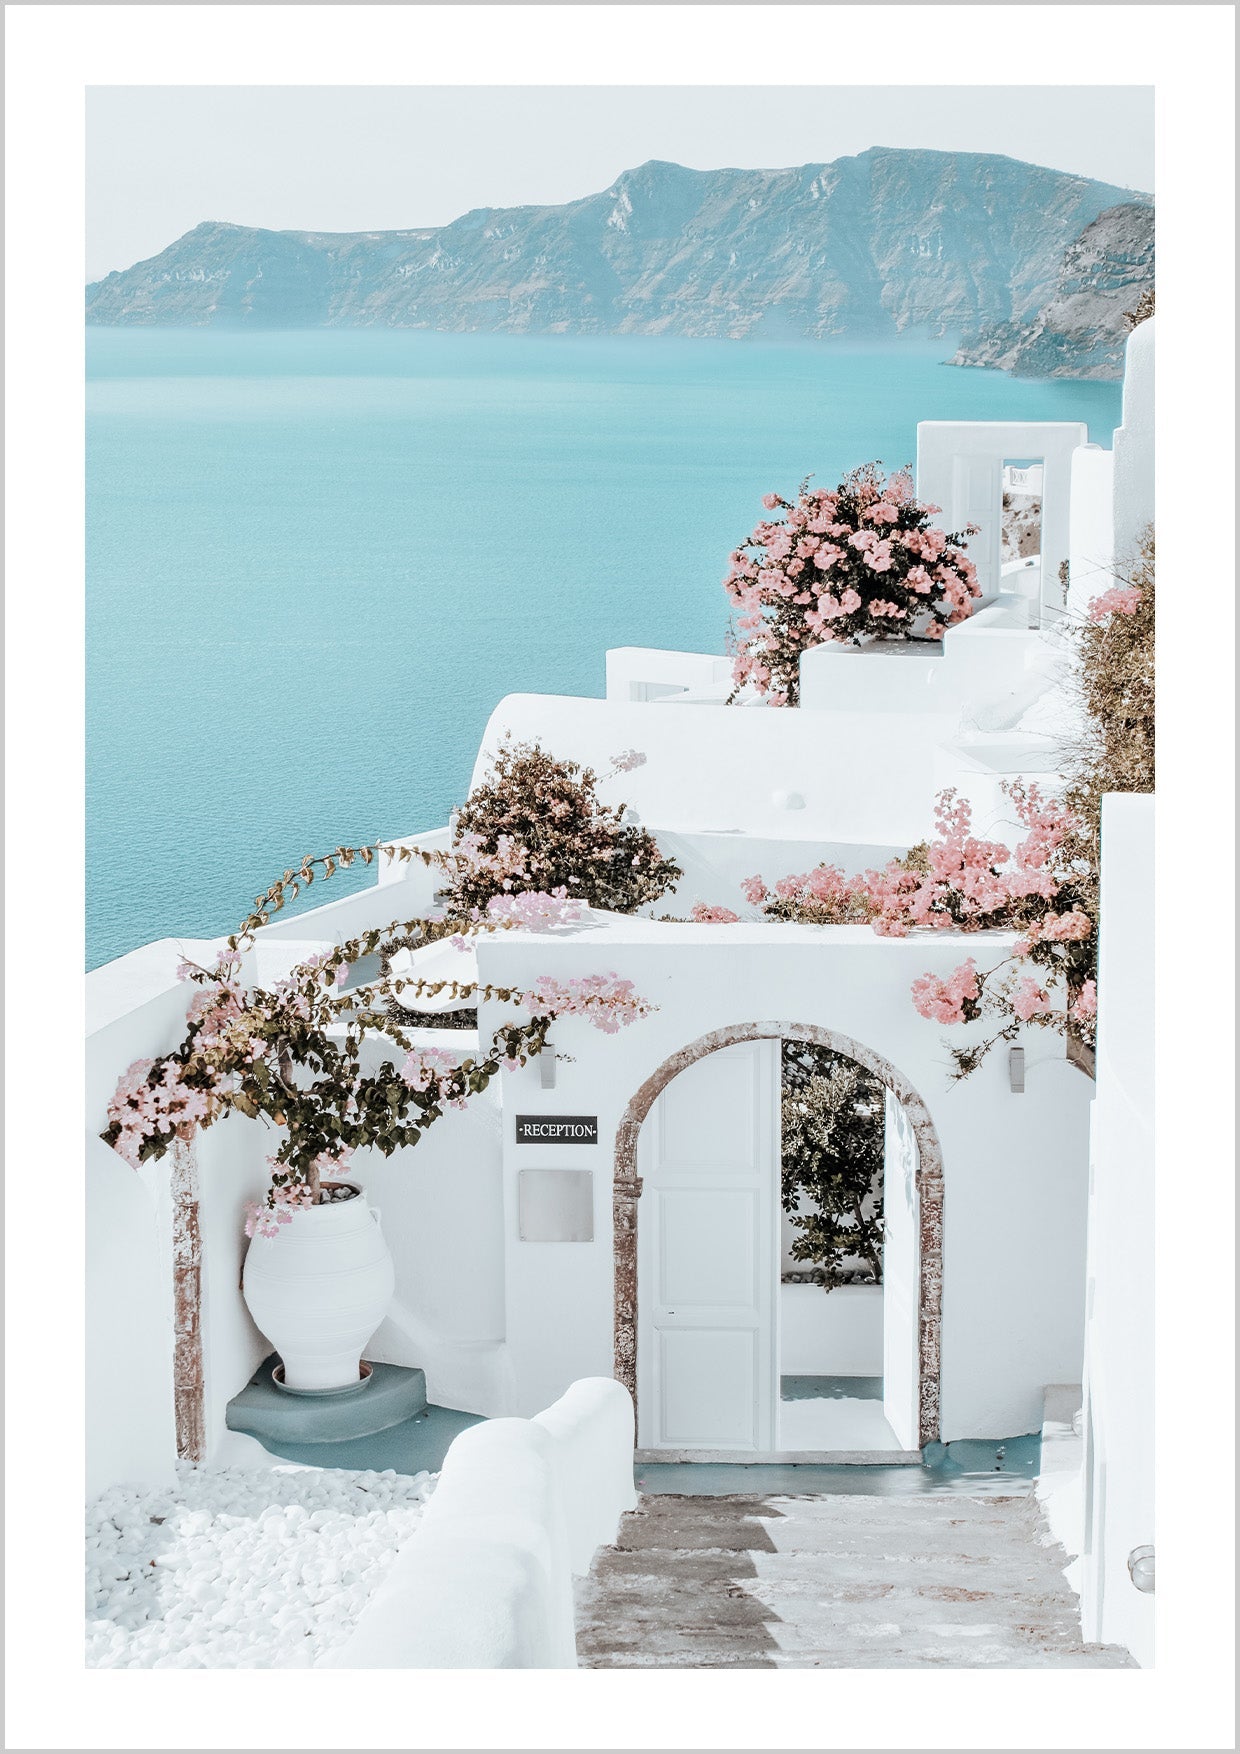 A beautiful landscape poster with a view of the Greek island of Santorini and the crystal clear blue sea. The traditional white house facades are decorated with pink flowers and make the Poster radiate.